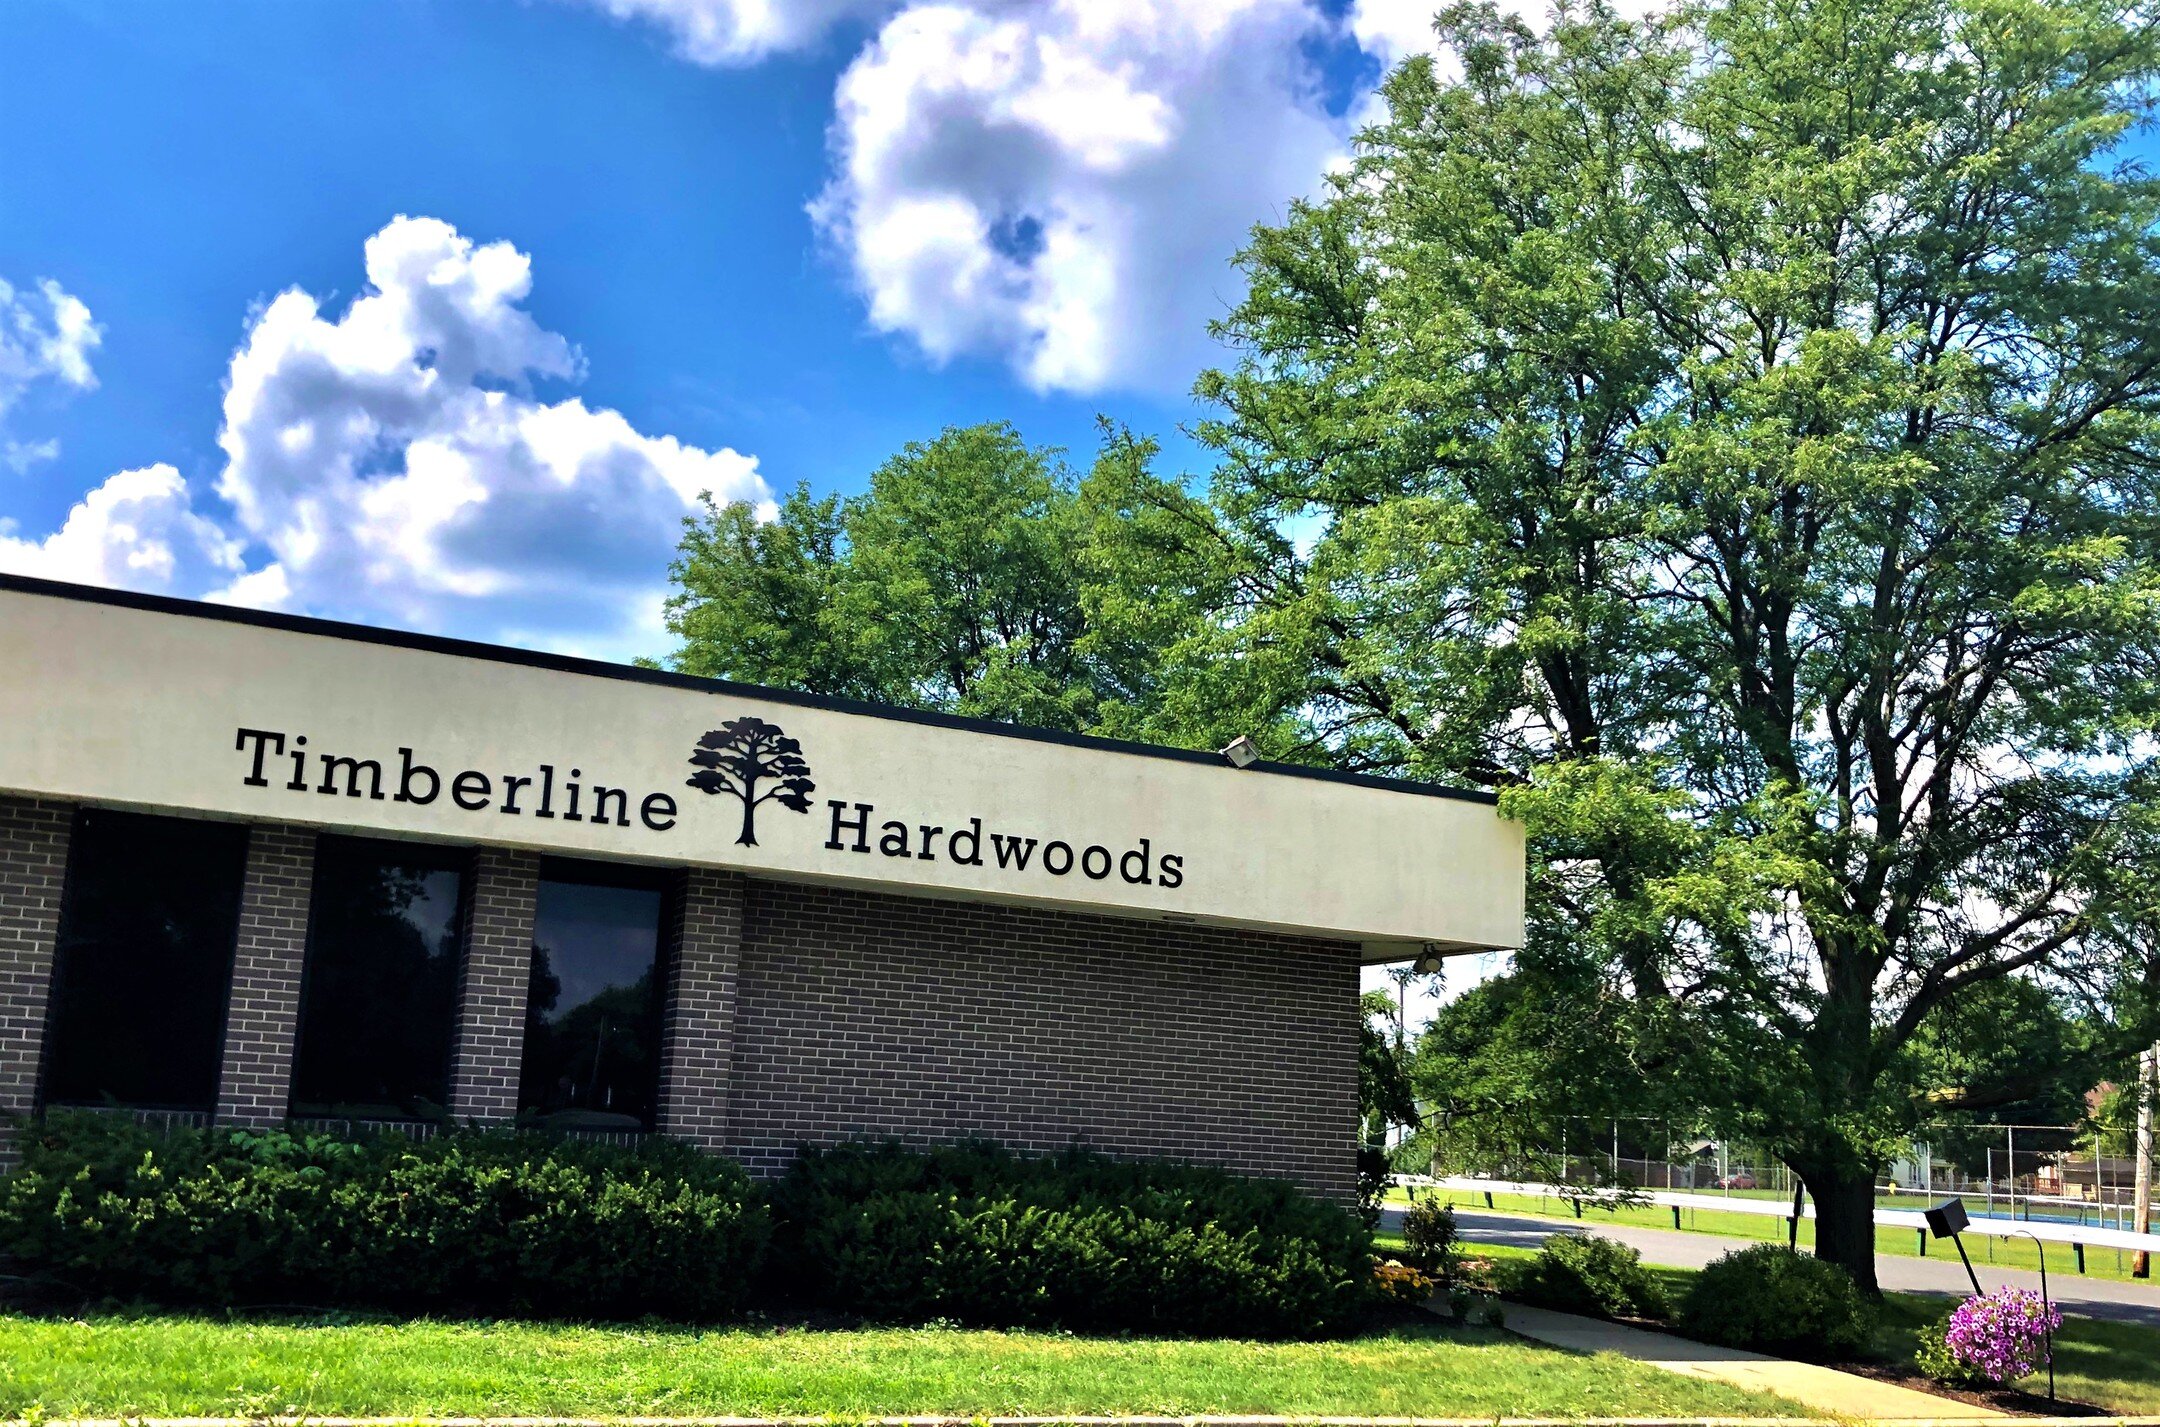 Missing summer and sunshine in NY! We have some GREAT hardwood flooring DEALS going on right now....less than $3/sf! 585-509-0575 7 West Ave Manchester NY #timberlinehardwoods #deals #manchesterny #hardwood #whiteoak #residential #commercial #home #h